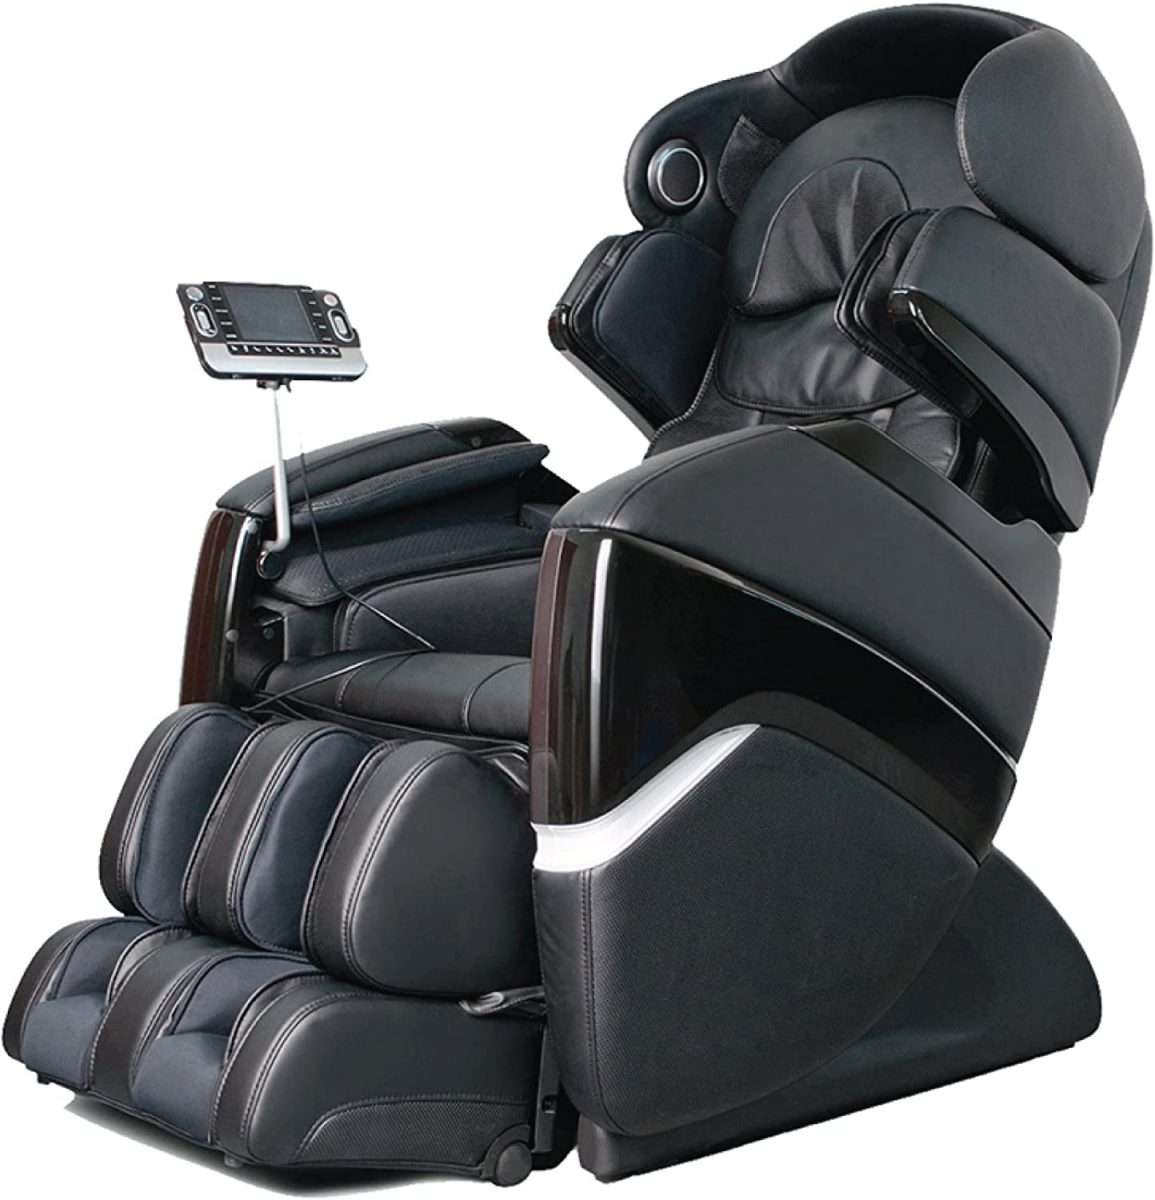 Best Cheap Massage Chair in The World for Home